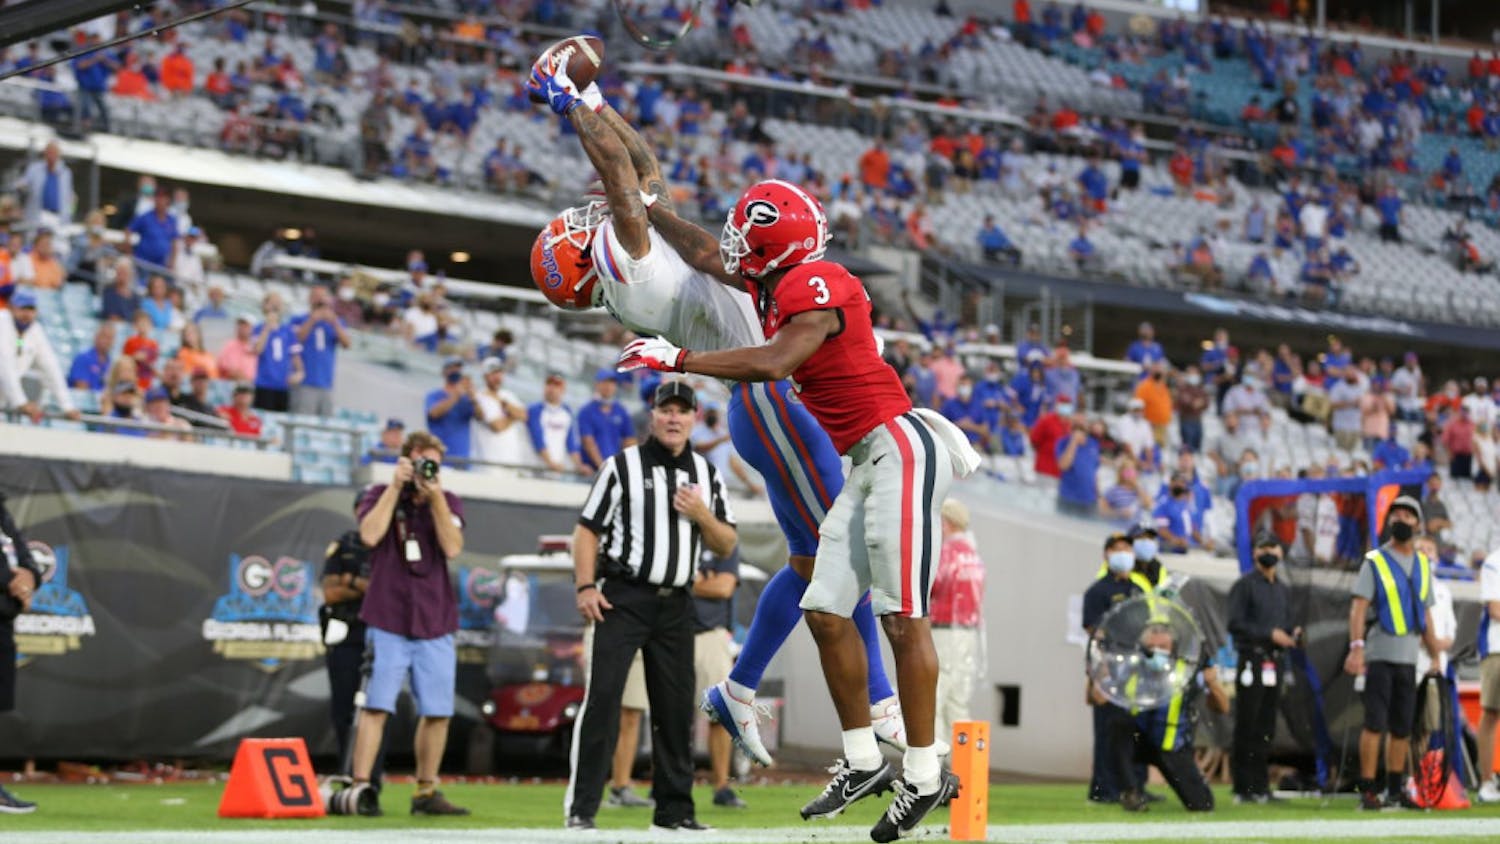 Wide receiver Trevon Grimes stretches to catch the football ball thrown by Gators quarterback Kyle Trask and score a touchdown for Florida against Georgia at TIAA Bank Field on Nov. 7, 2020.